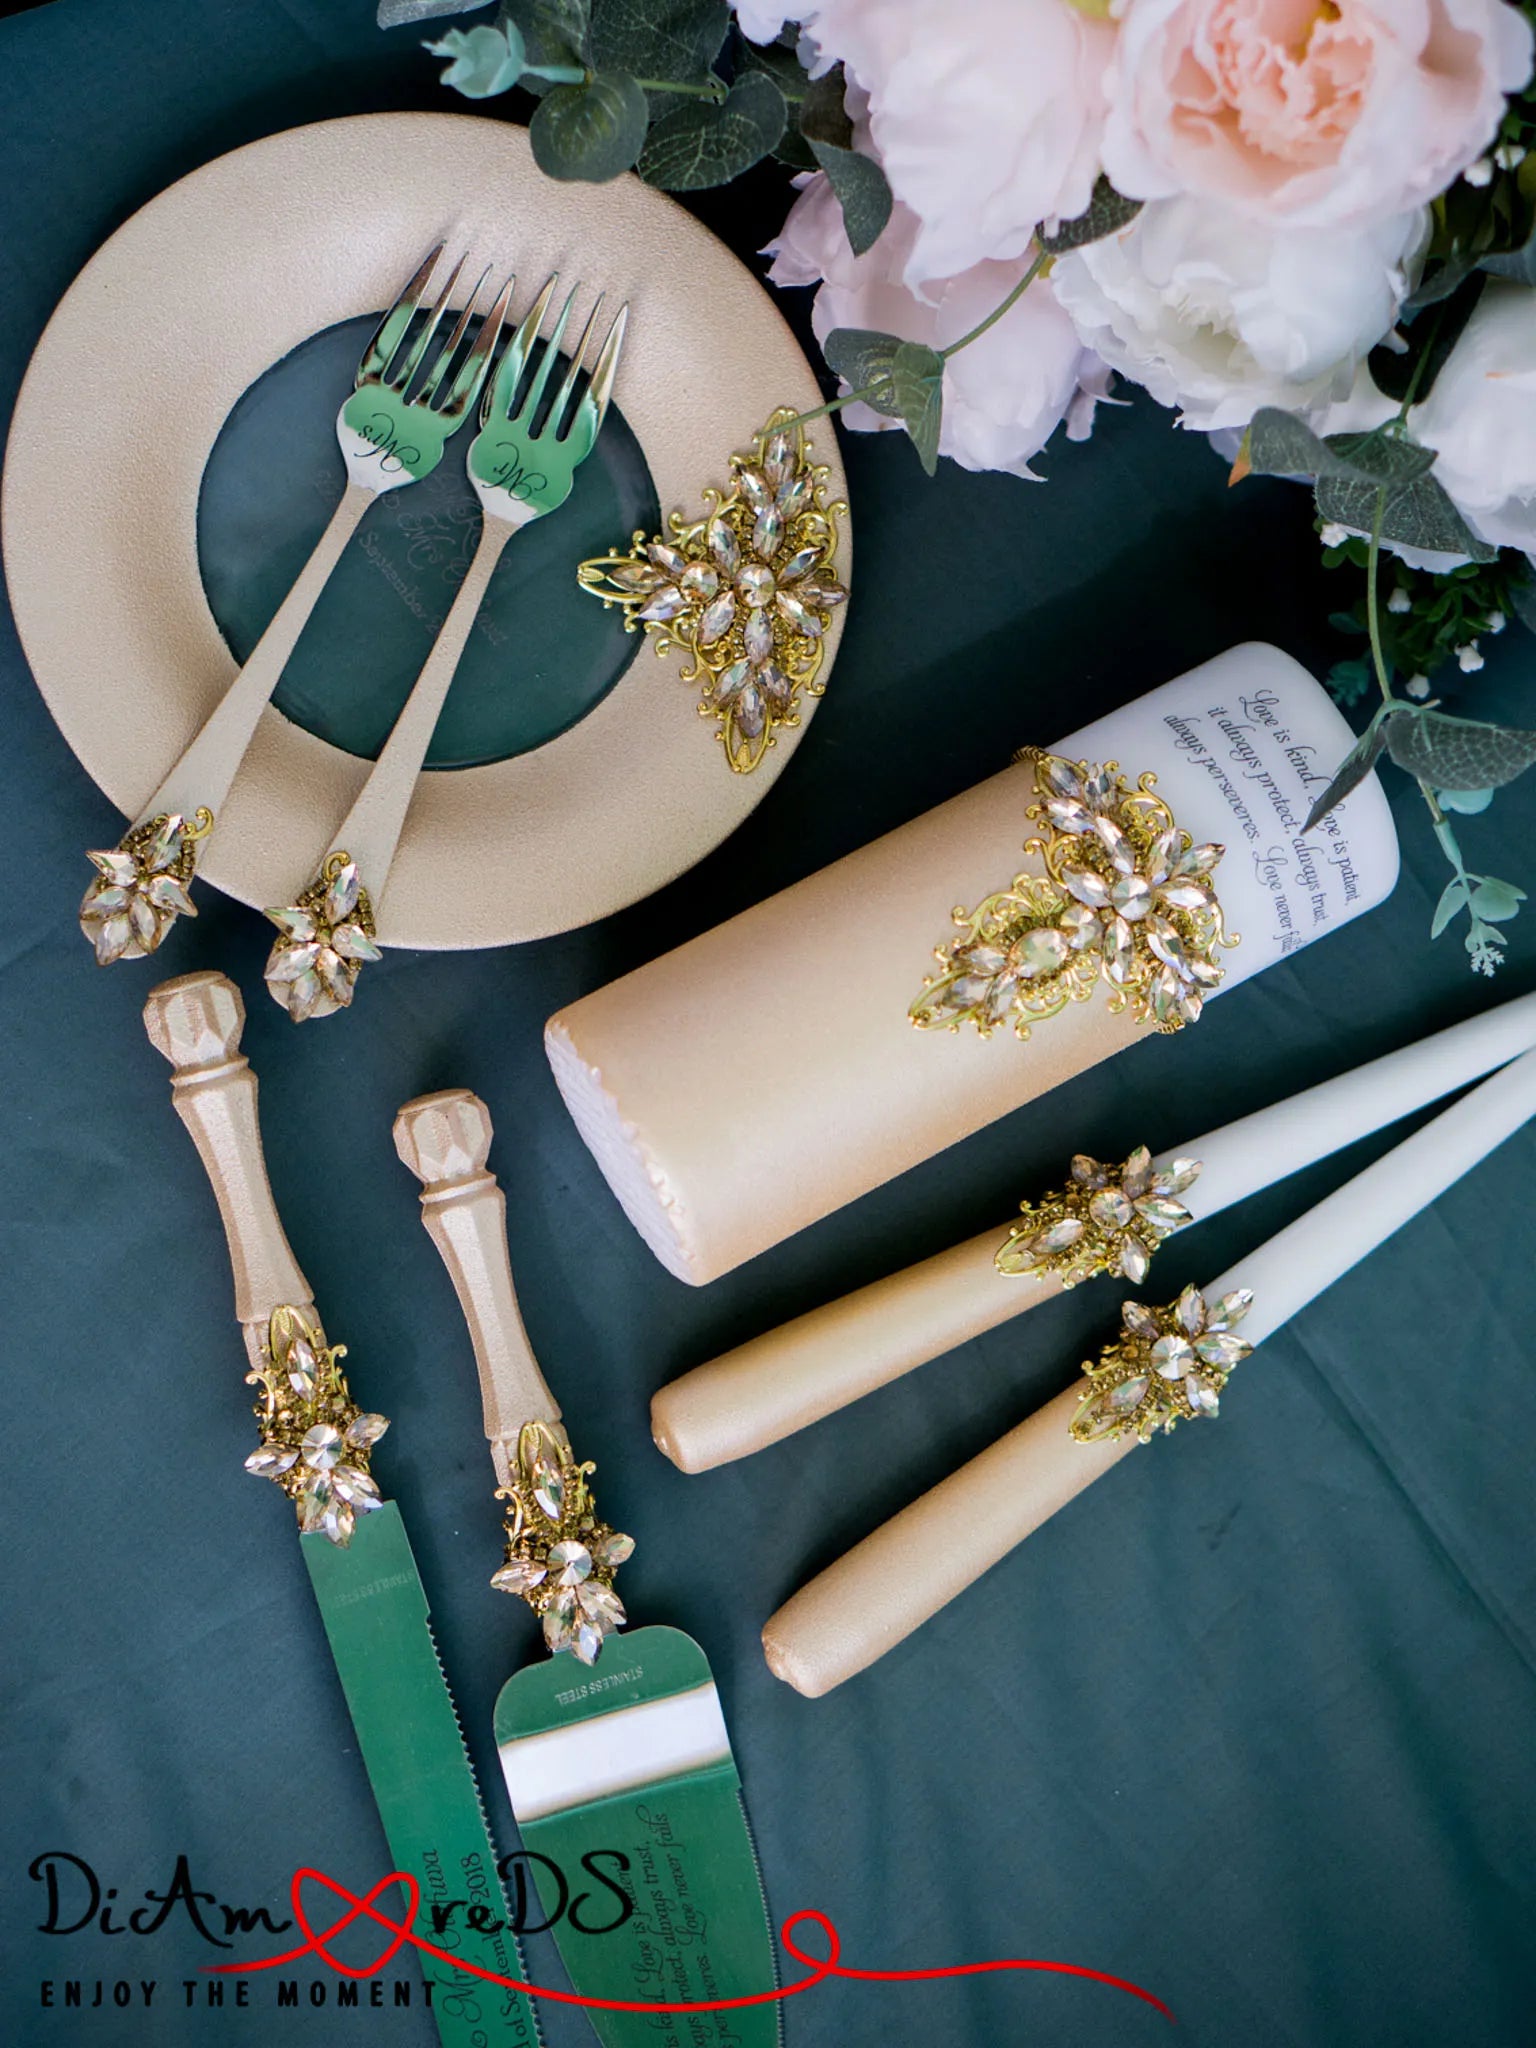 Customizable wedding accessories for special occasions